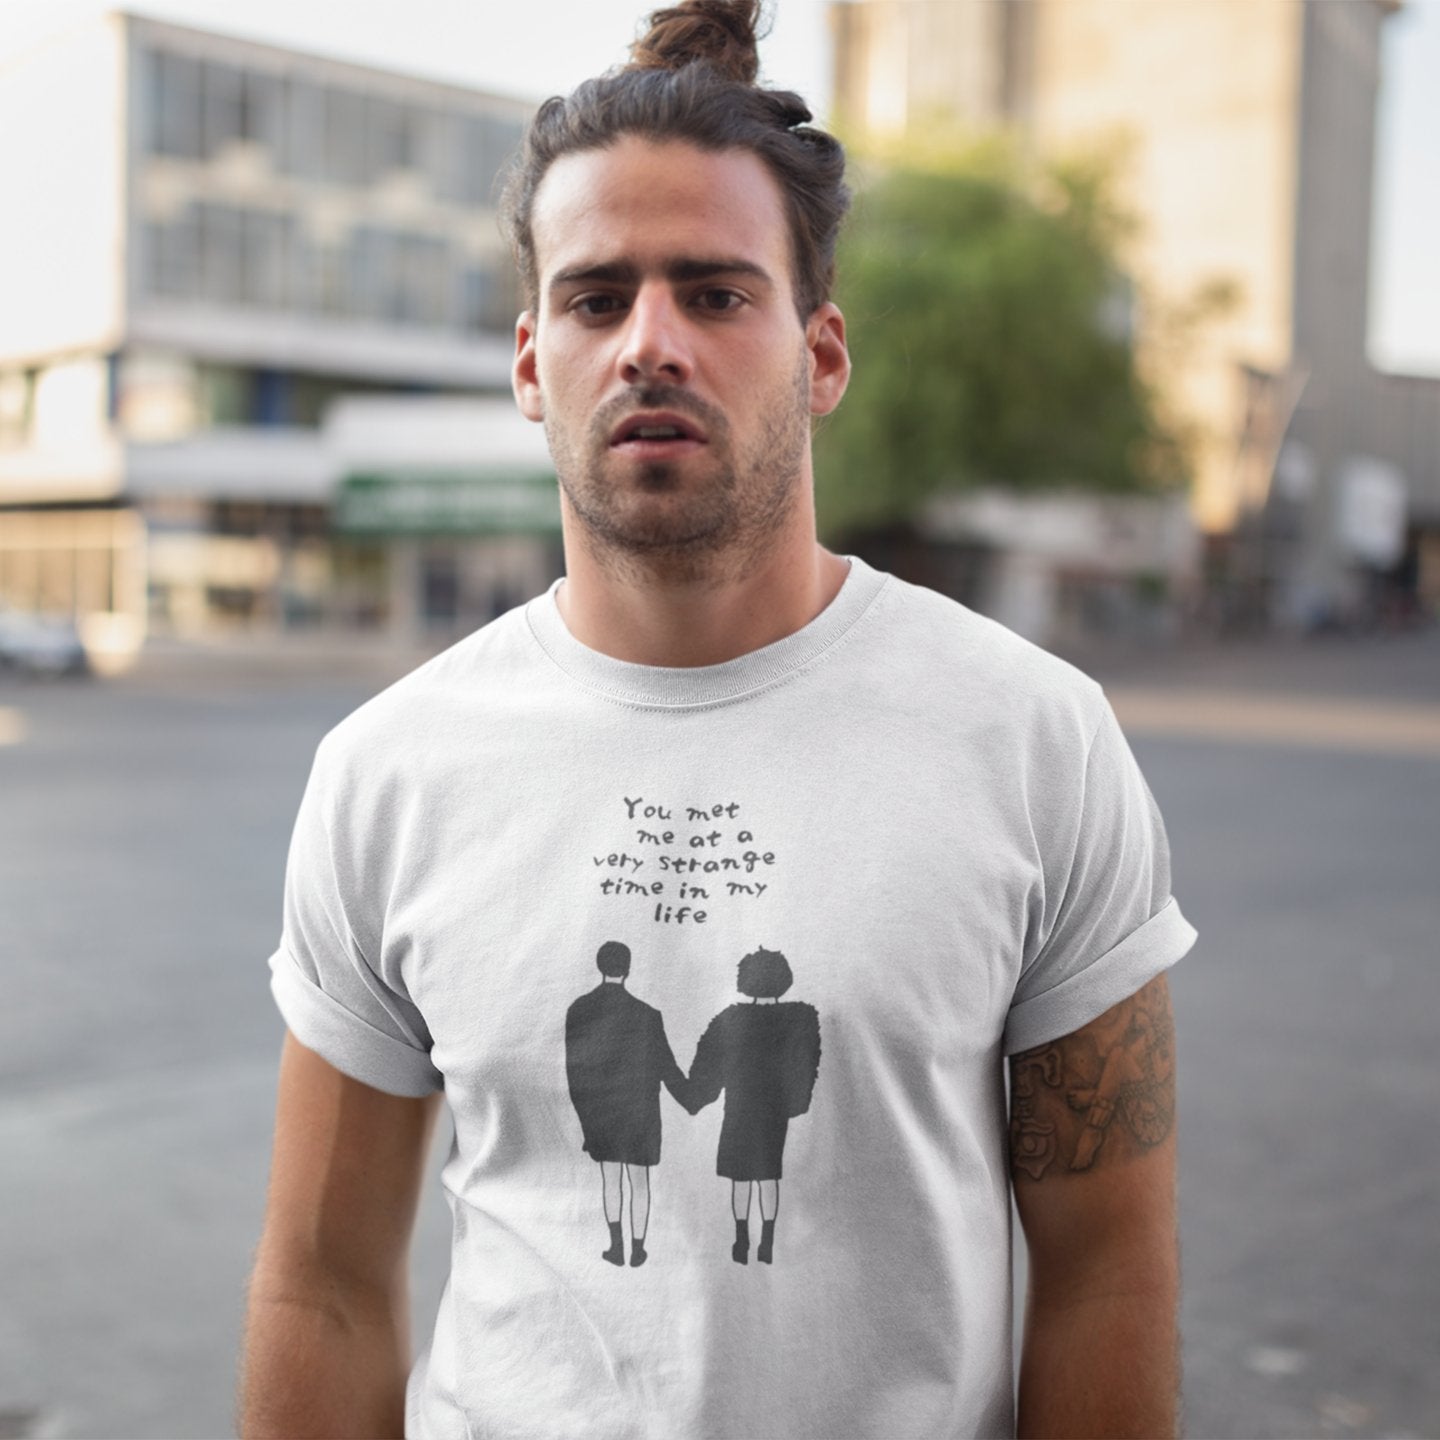 You Met Me at a Very Strange Time in My Life Fight Club - T-Shirt